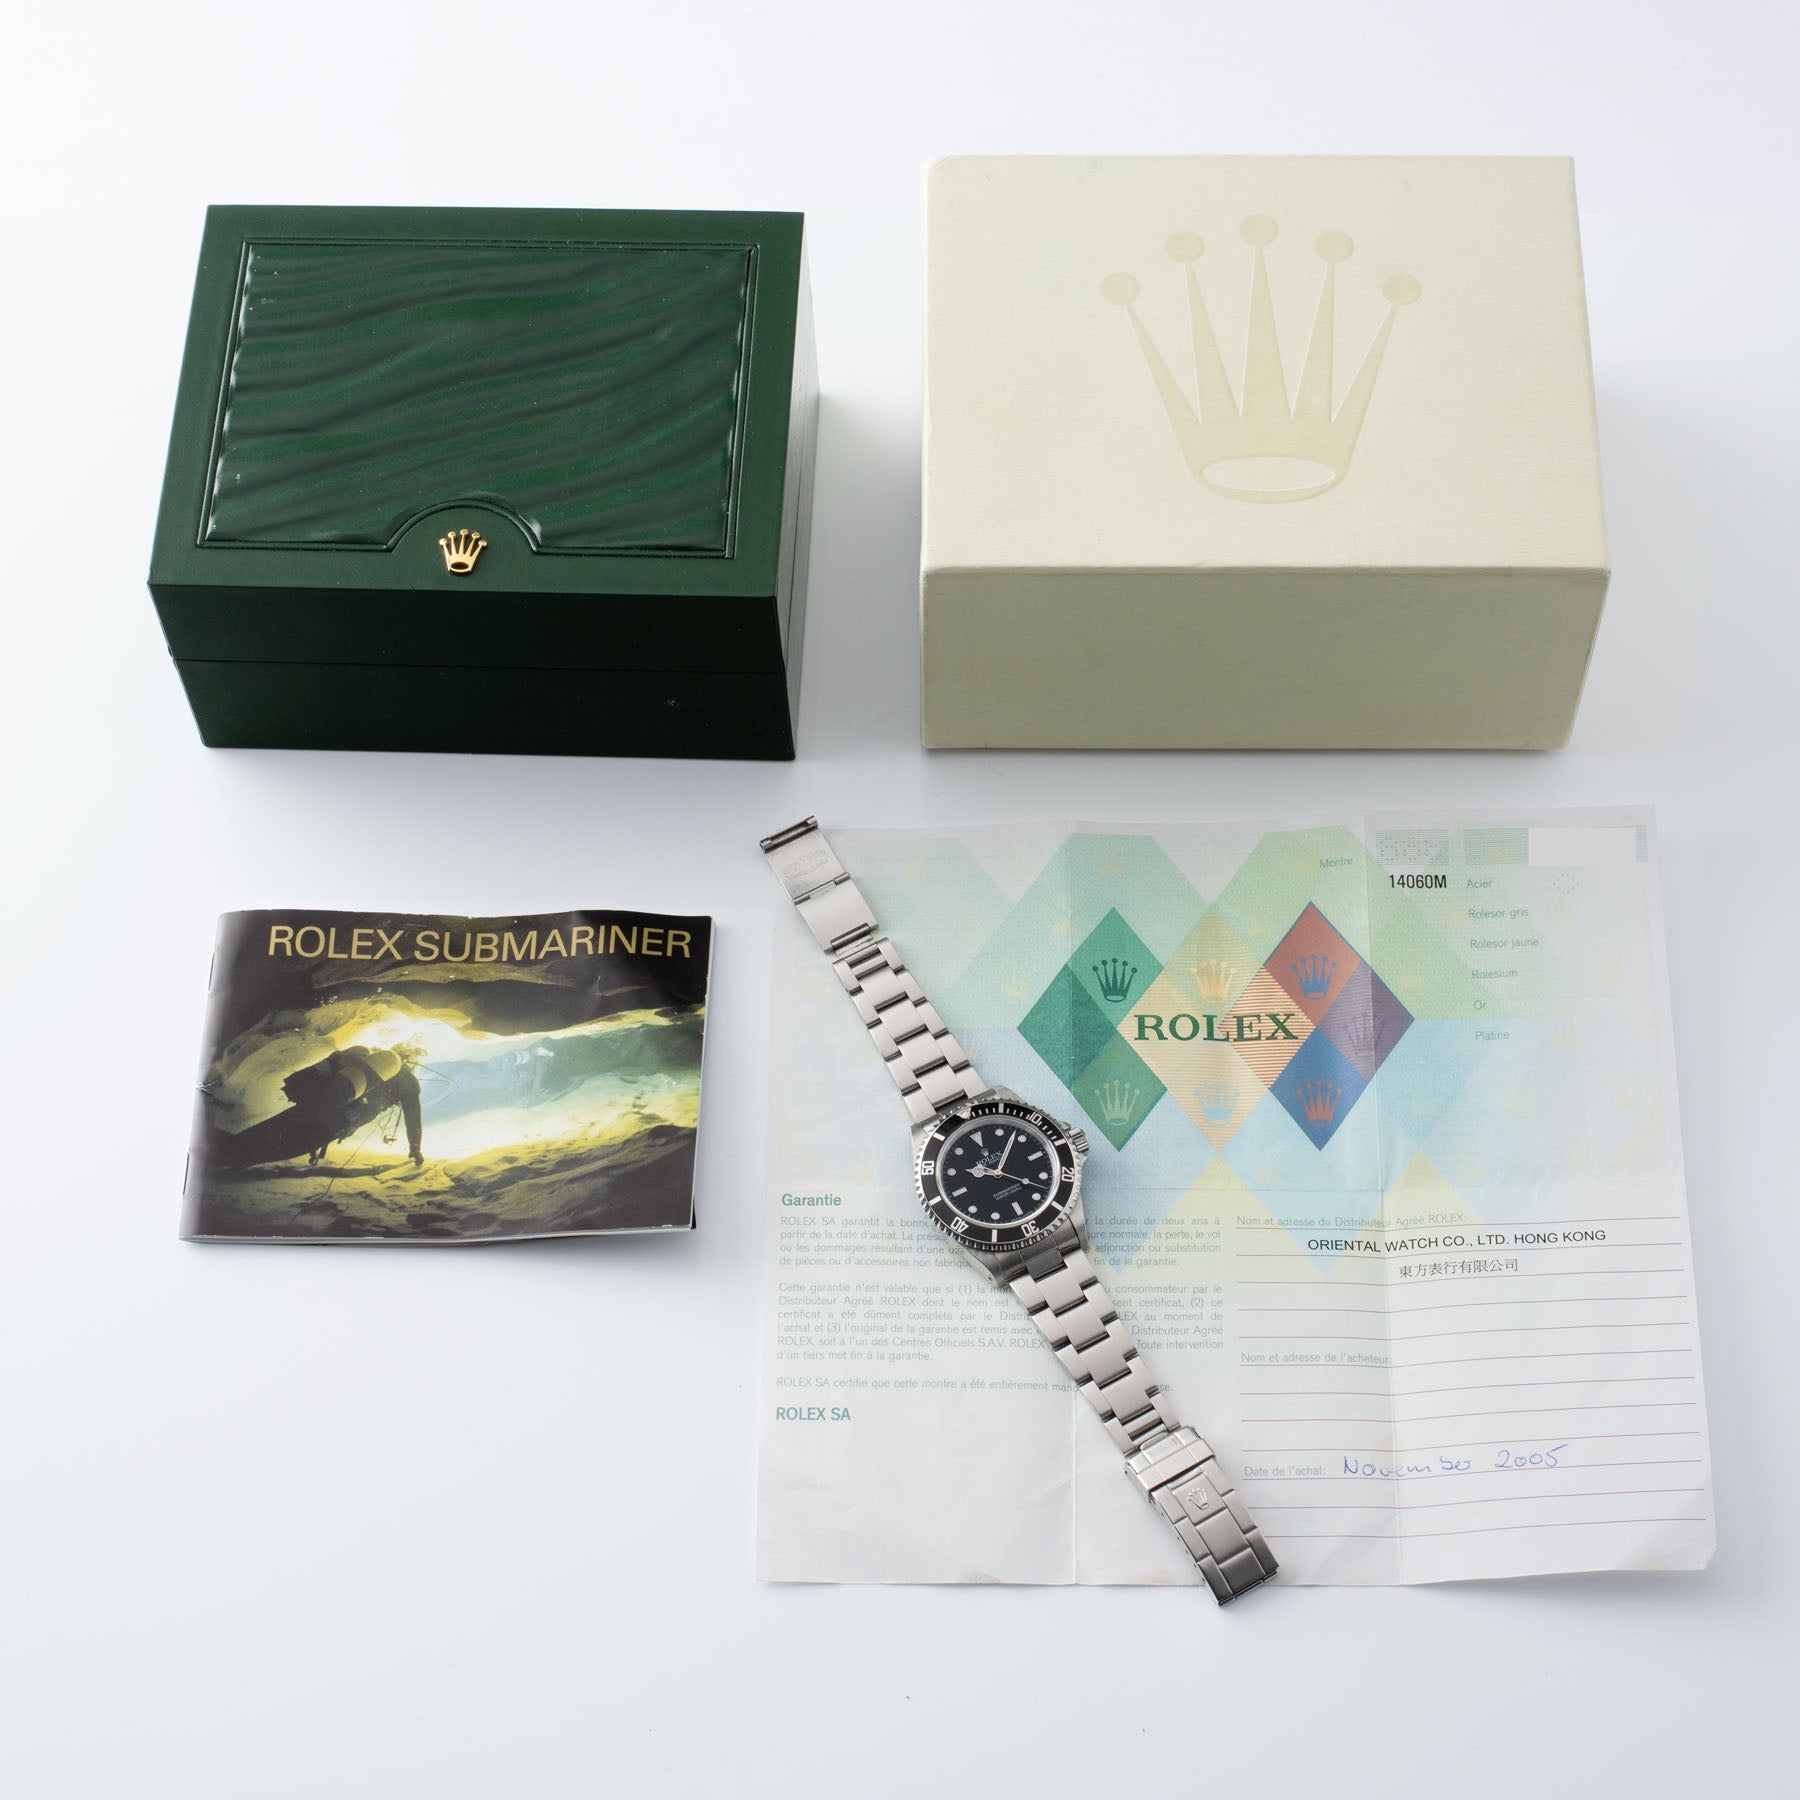 Rolex Submariner Two-Line Dial 14060M Box and Papers